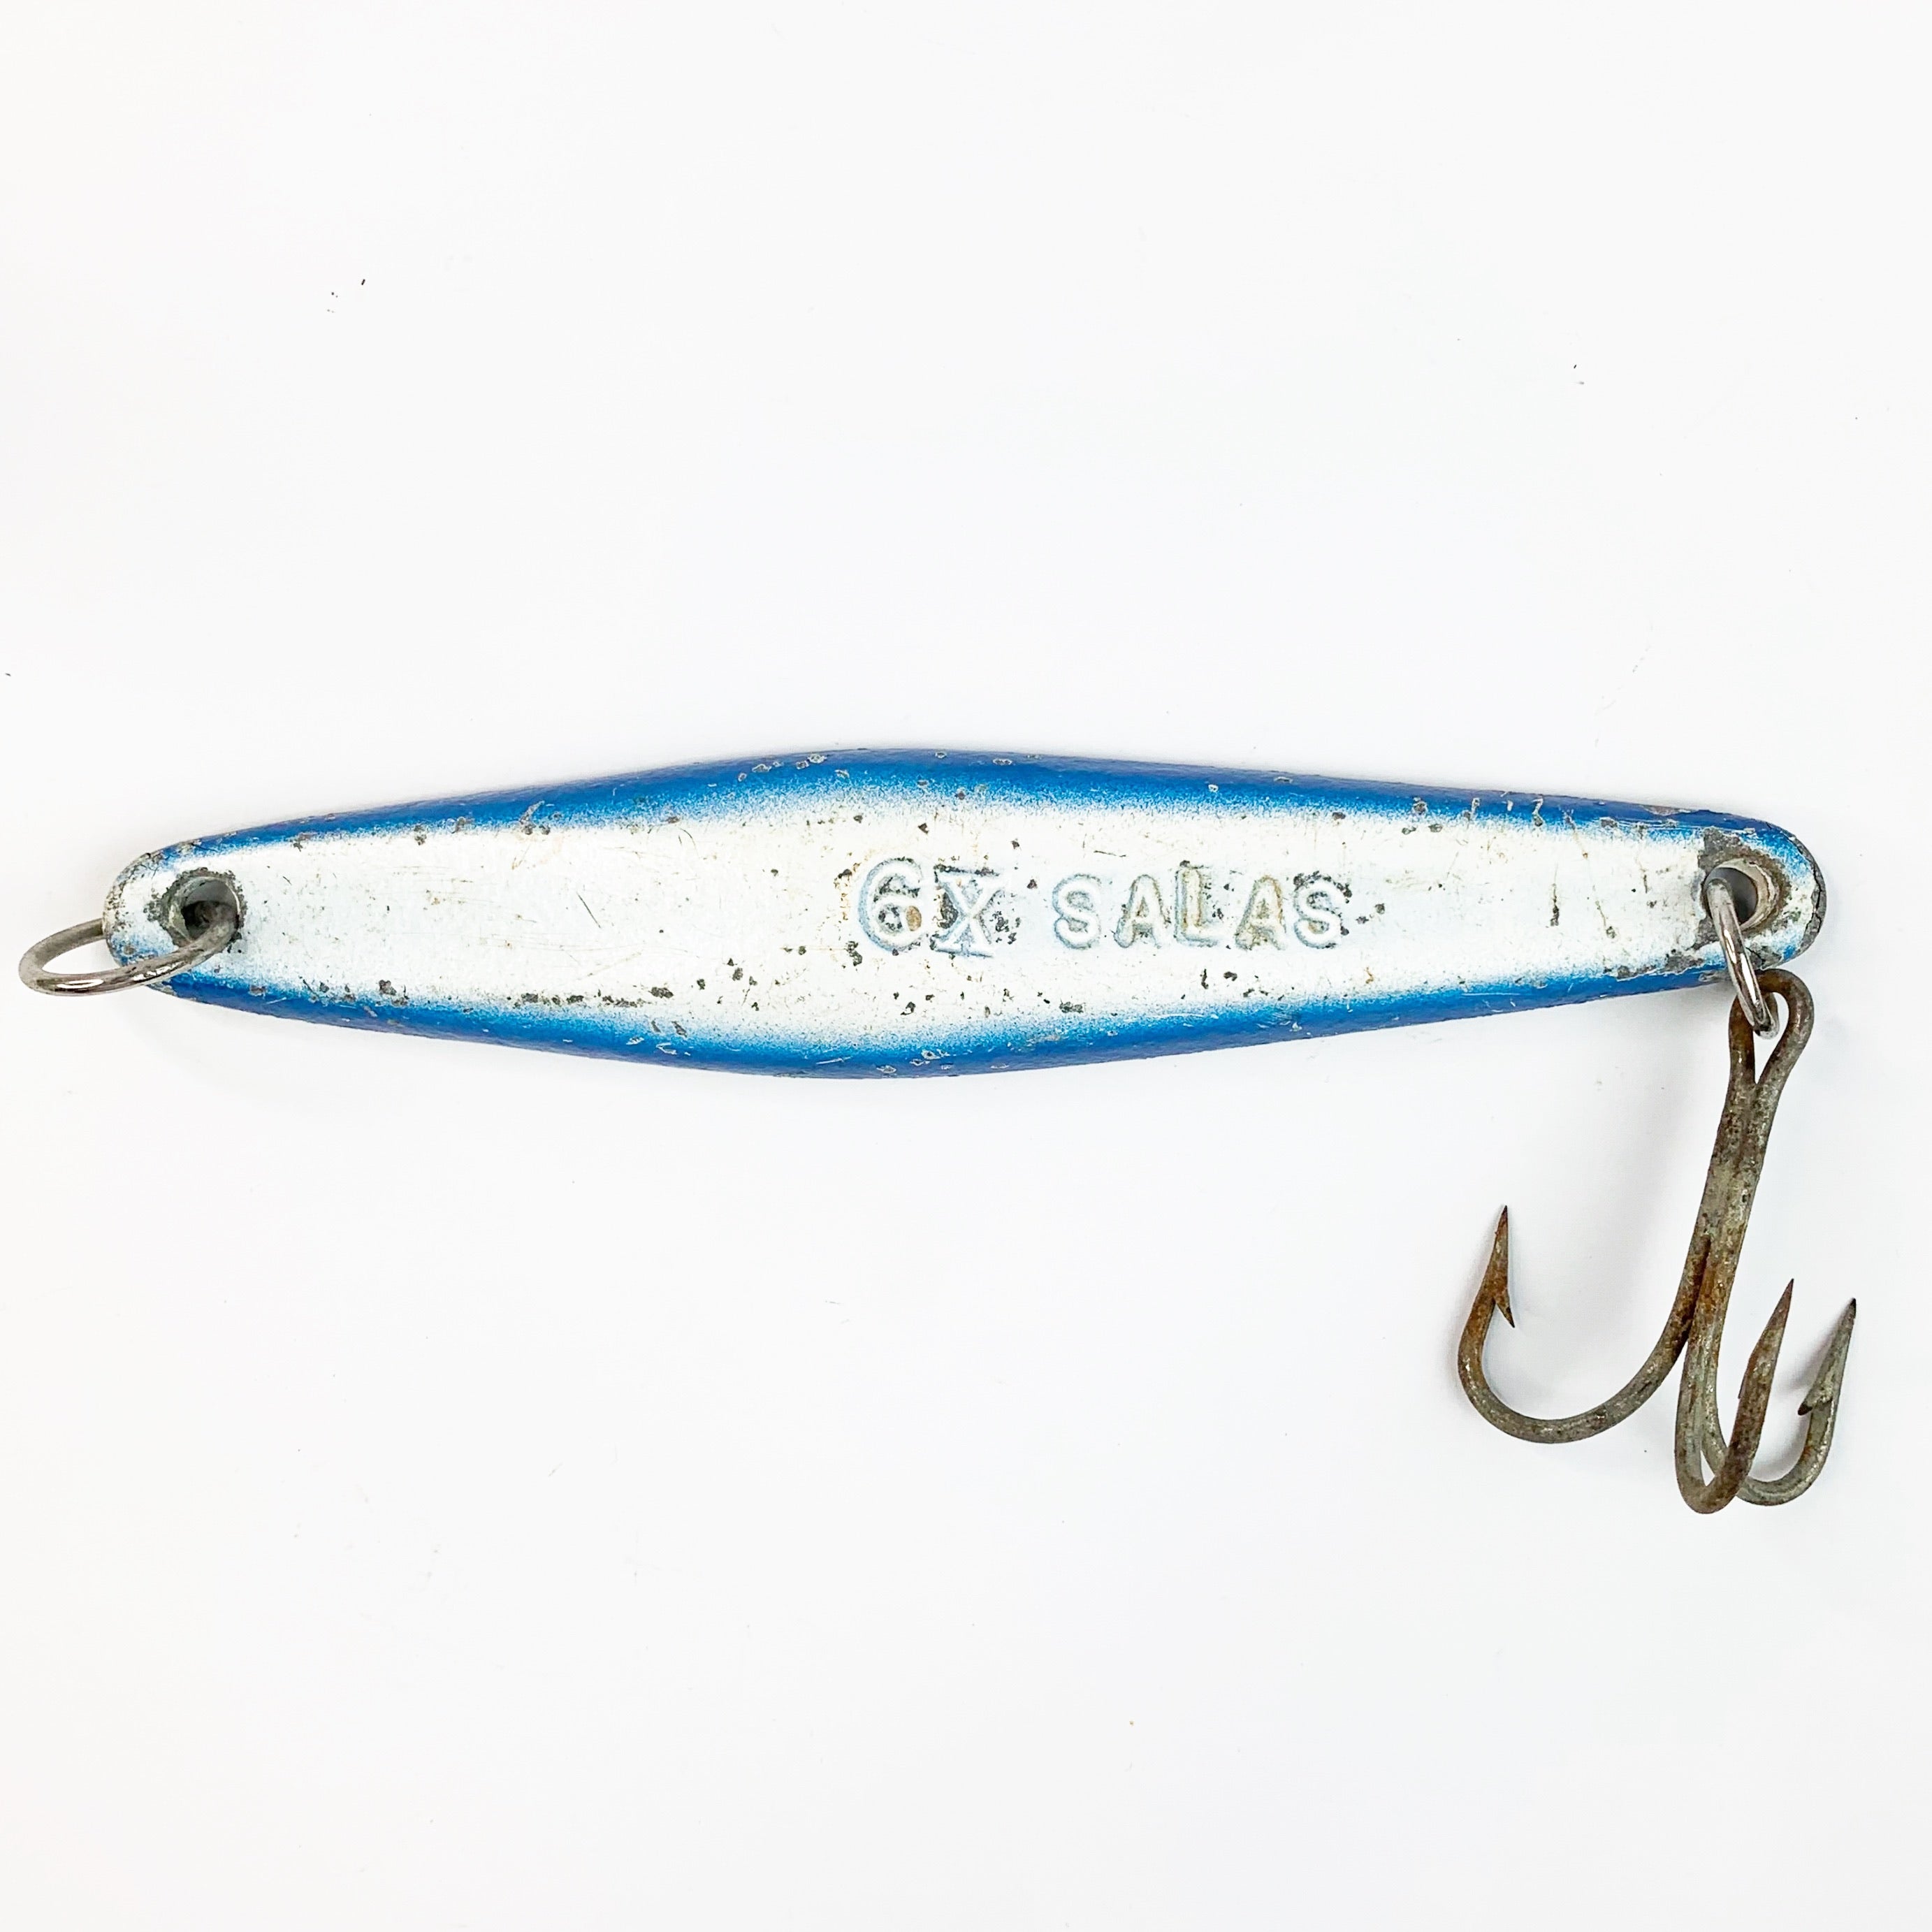 Vintage Metal Saltwater Fishing Salas 6X Blue/ White Lure – The Stand Alone